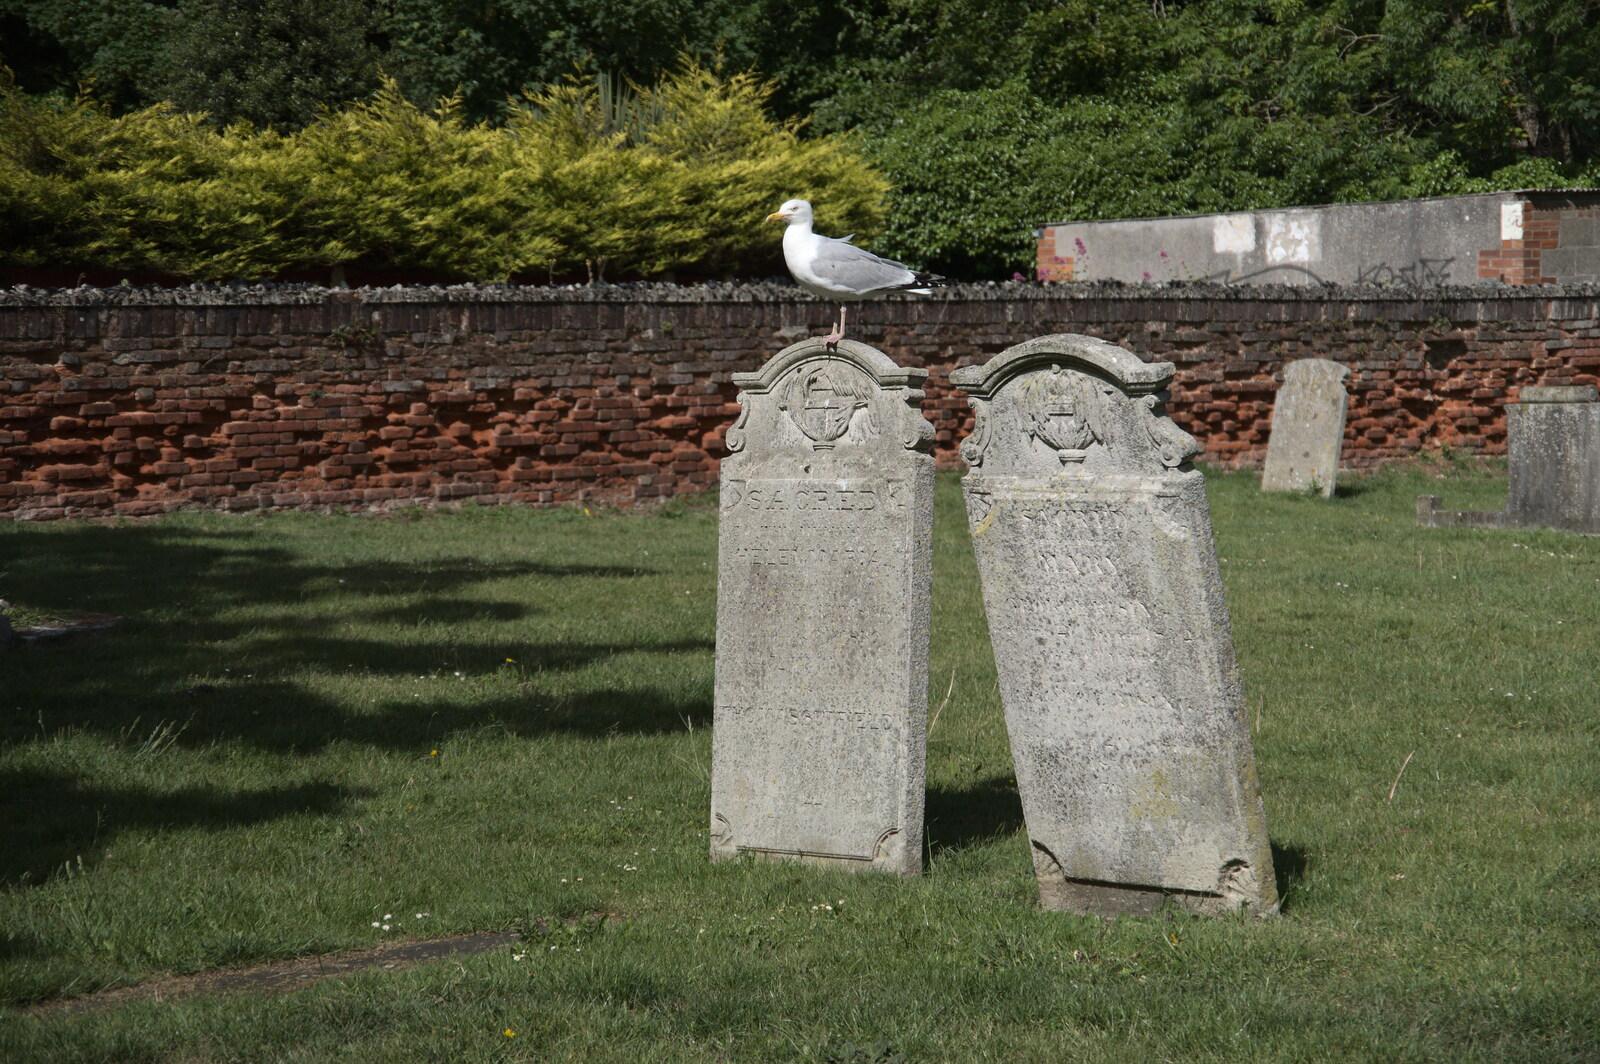 A herring gull with attitude perches on a gravestone from Faded Seaside Glamour: A Weekend in Great Yarmouth, Norfolk - 29th May 2022